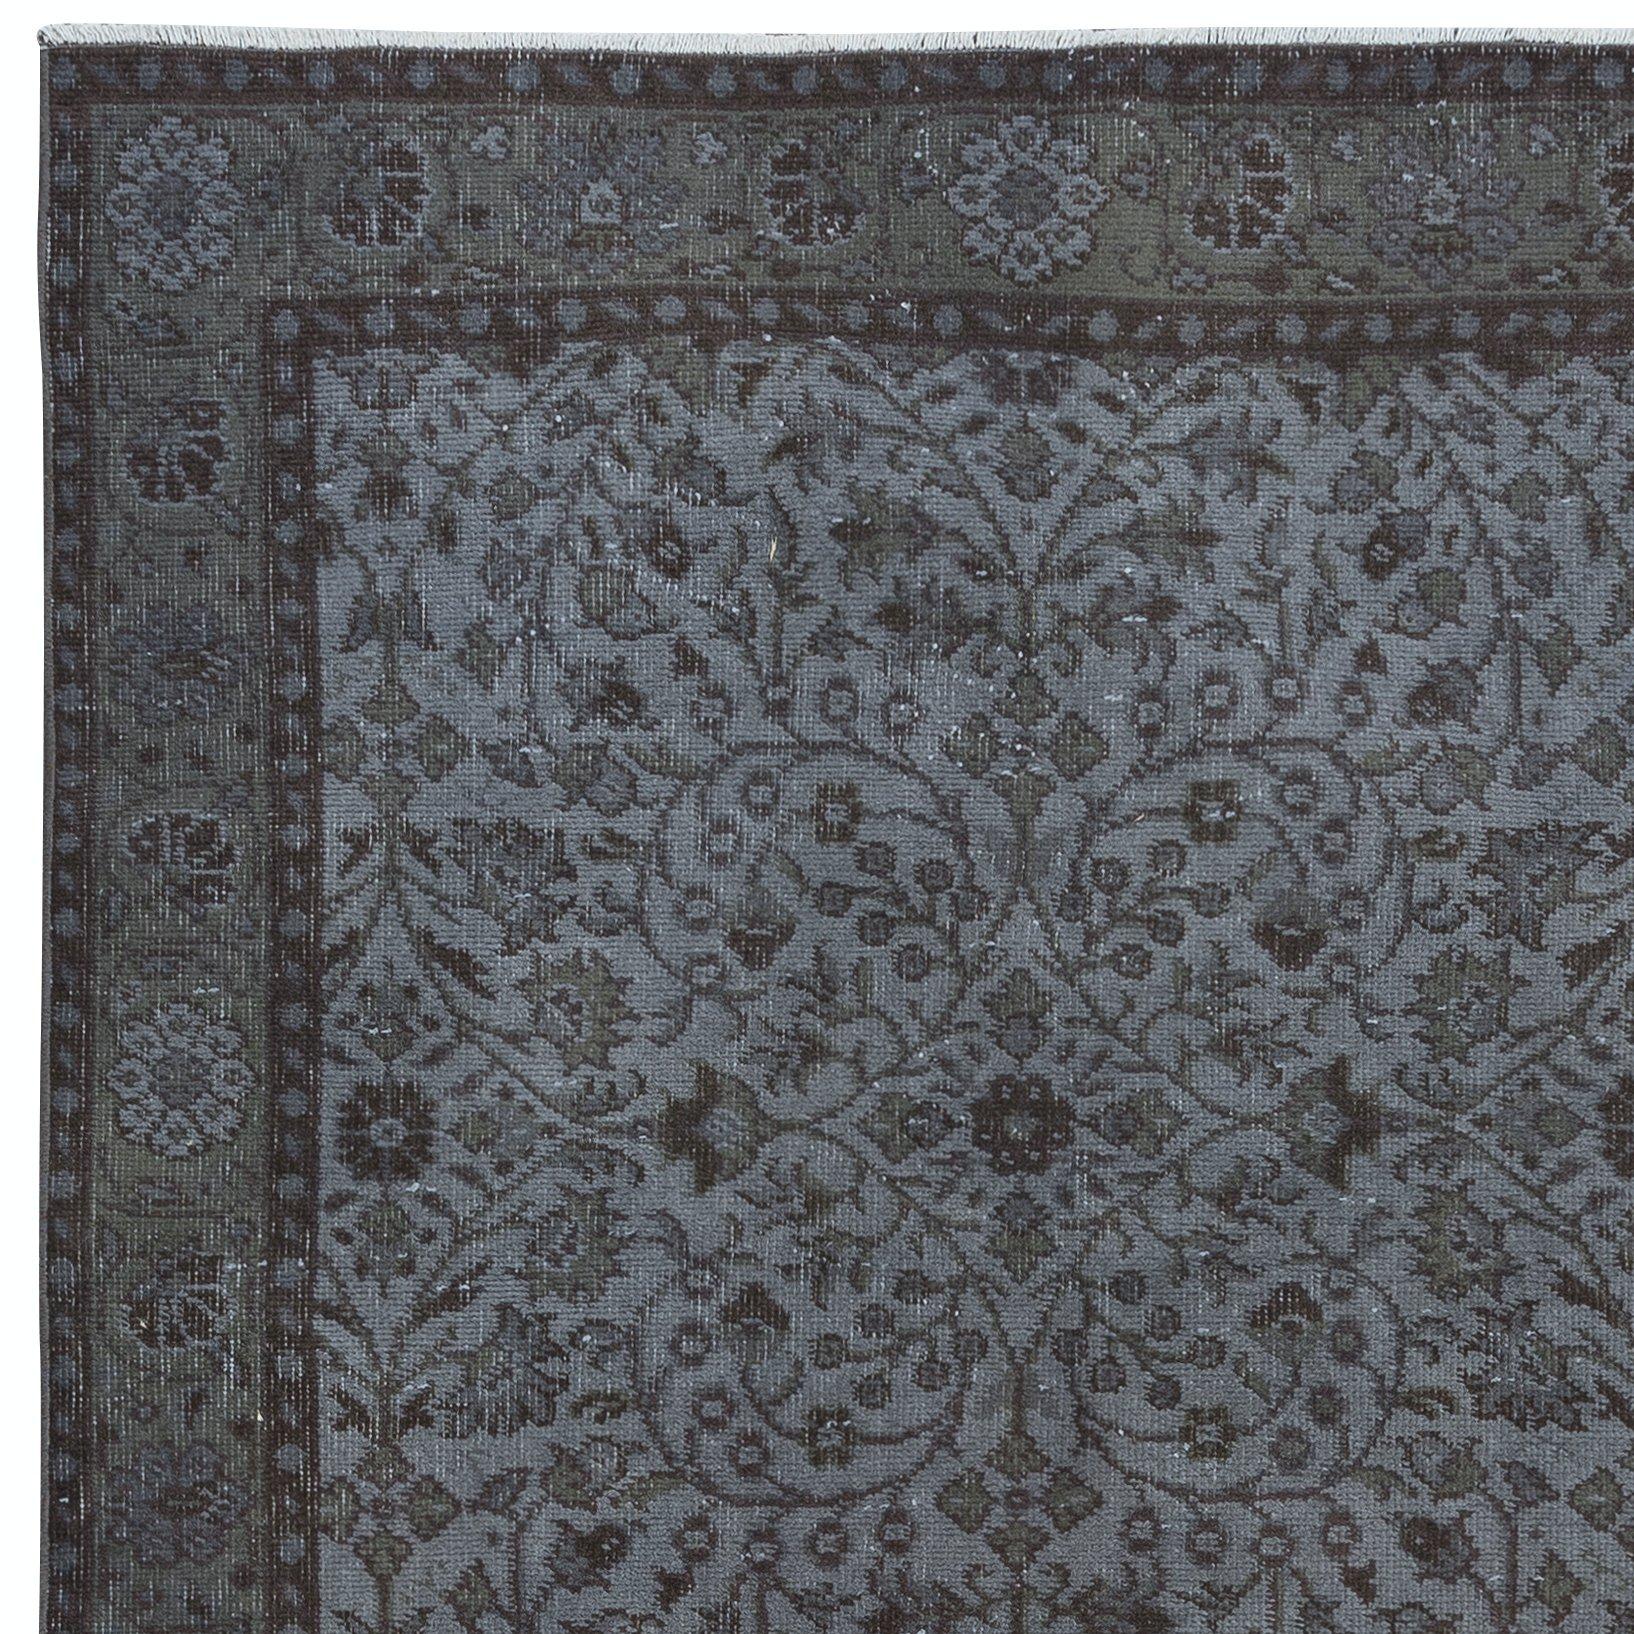 Hand-Woven 4x7 Ft Dark Gray Modern Area Rug, Handwoven and Handknotted in Isparta, Turkey For Sale